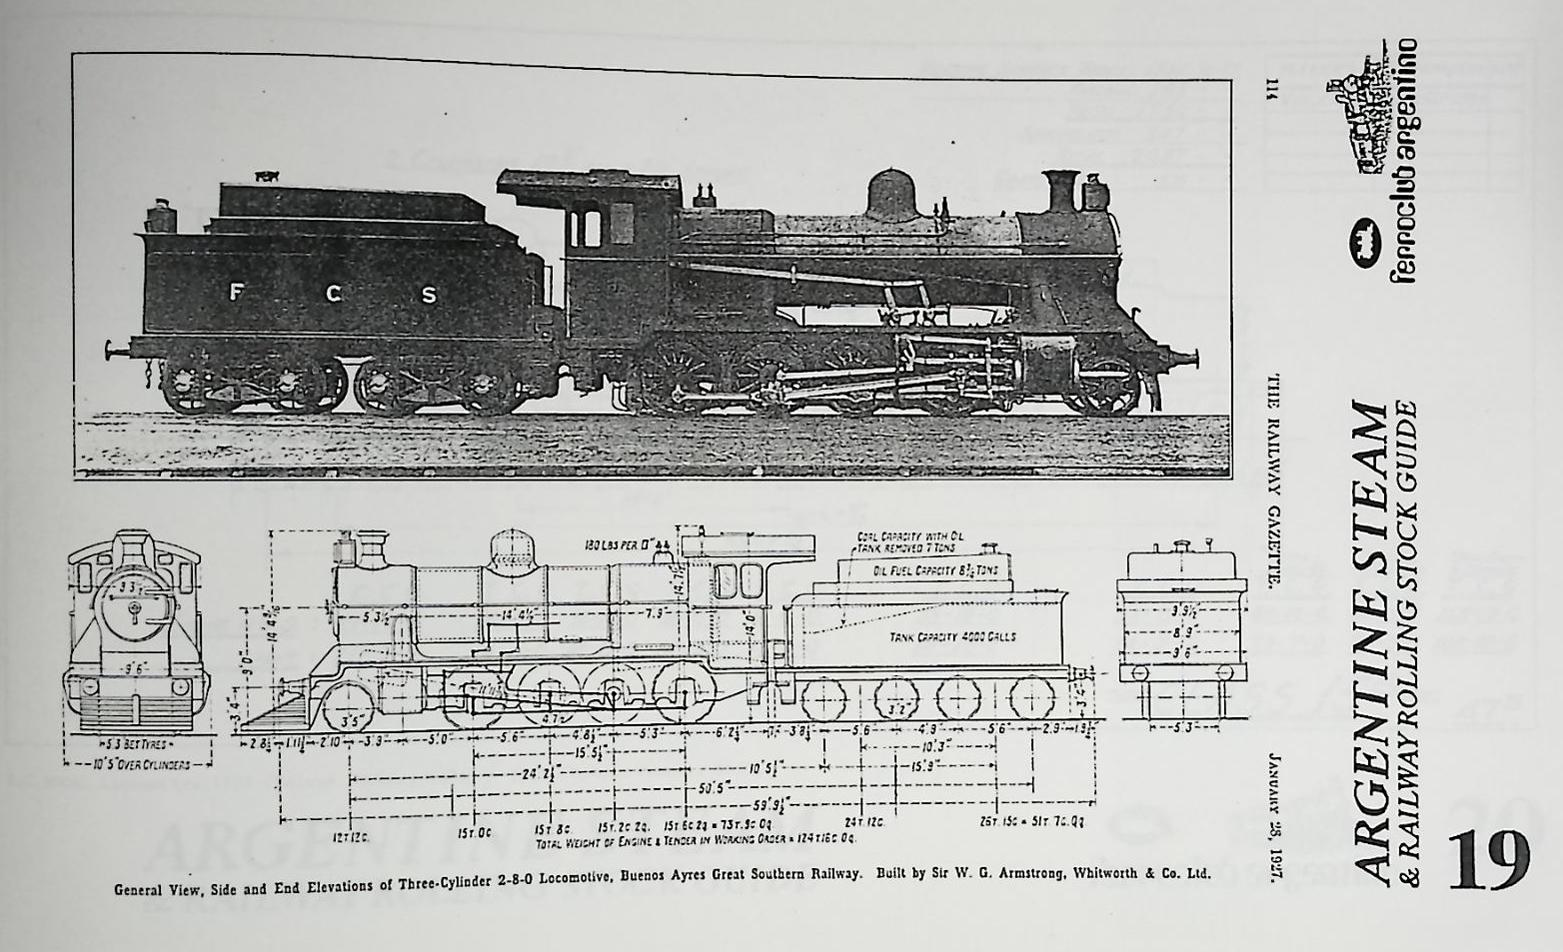 Argentine Steam & Railway Rolling Stock Guide